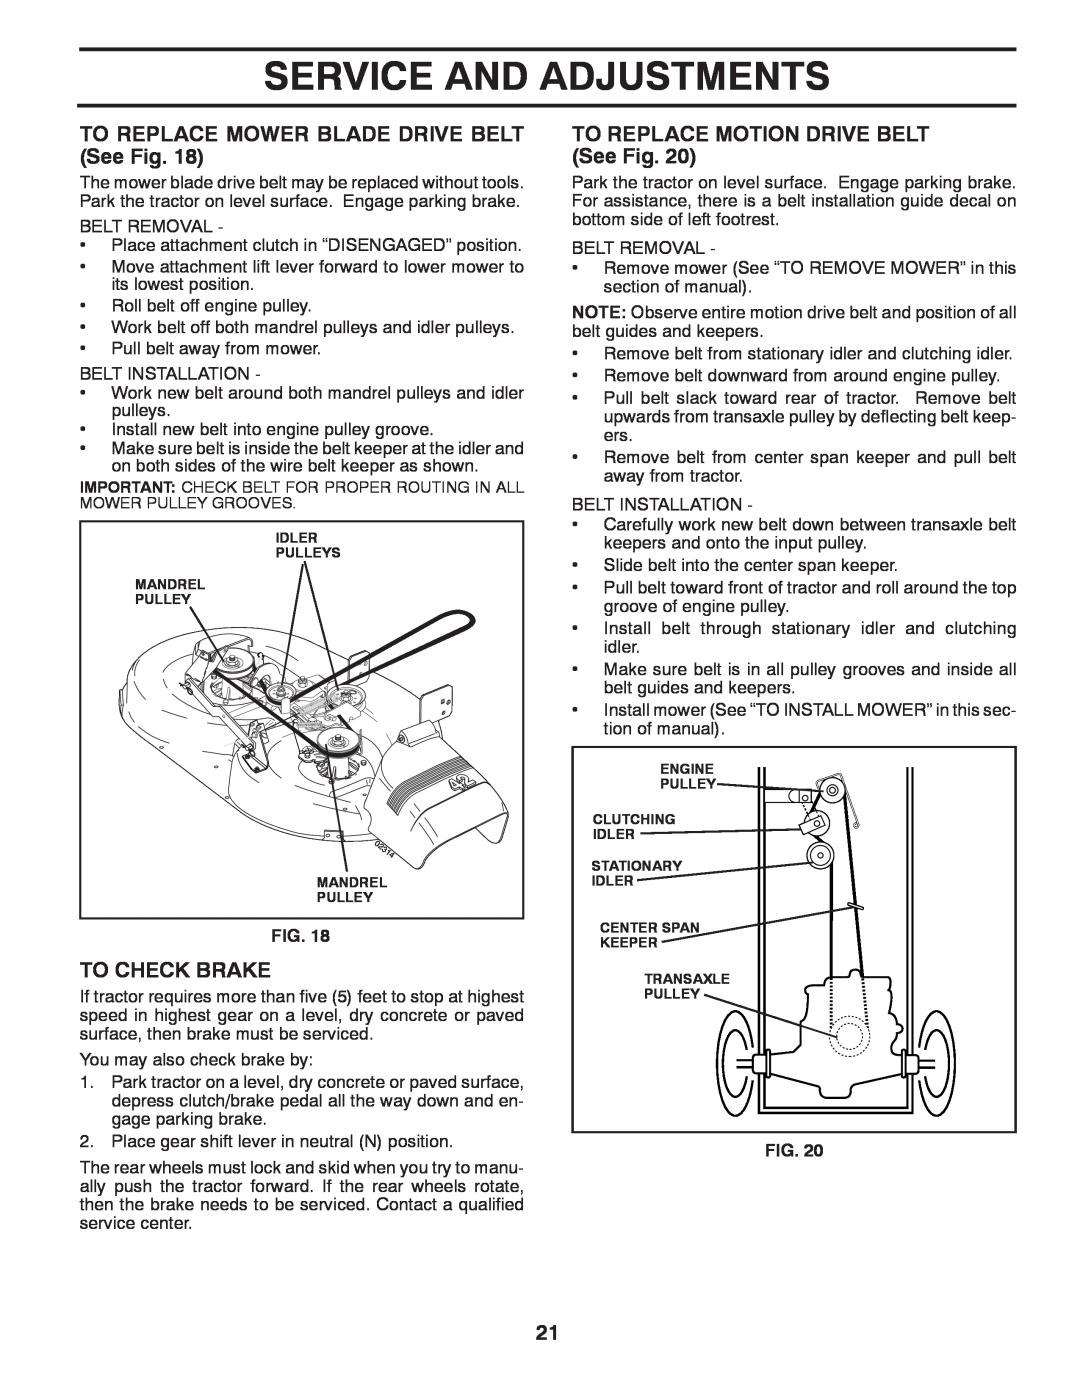 Poulan 414754, 96012006802 TO REPLACE MOWER BLADE DRIVE BELT See Fig, To Check Brake, TO REPLACE MOTION DRIVE BELT See Fig 